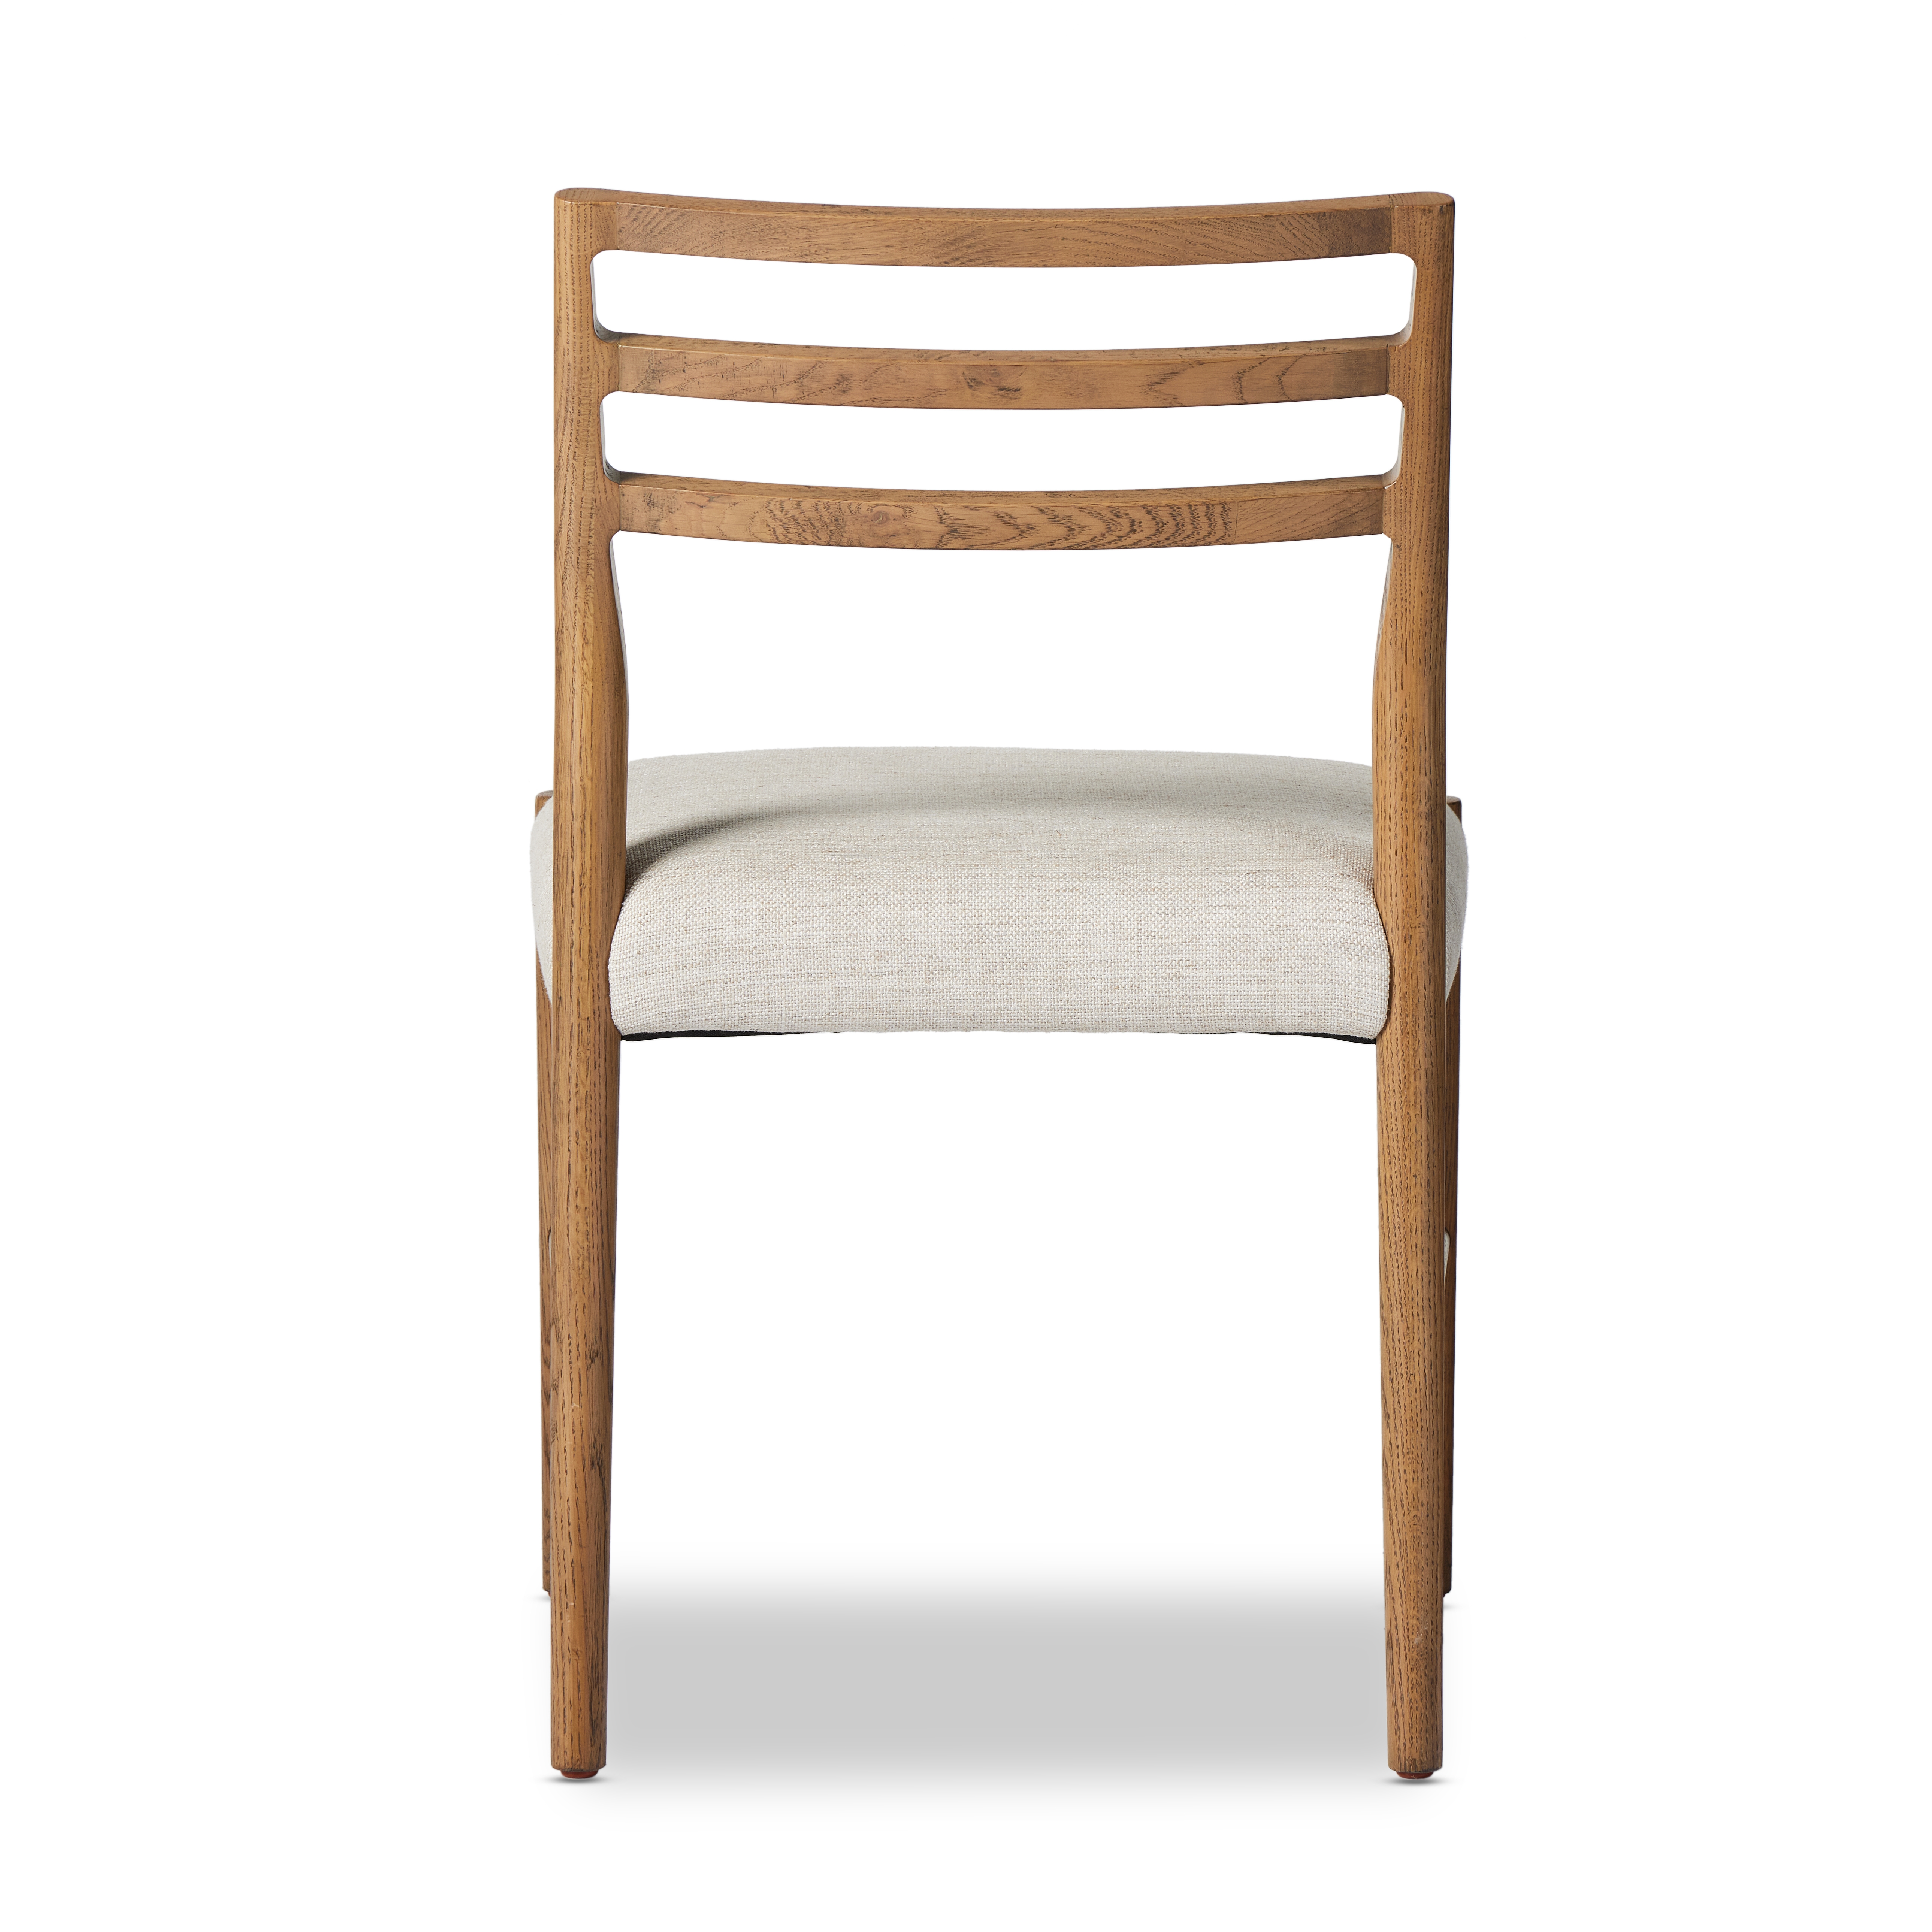 Glenmore Dining Chair-Smoked Oak - Image 5